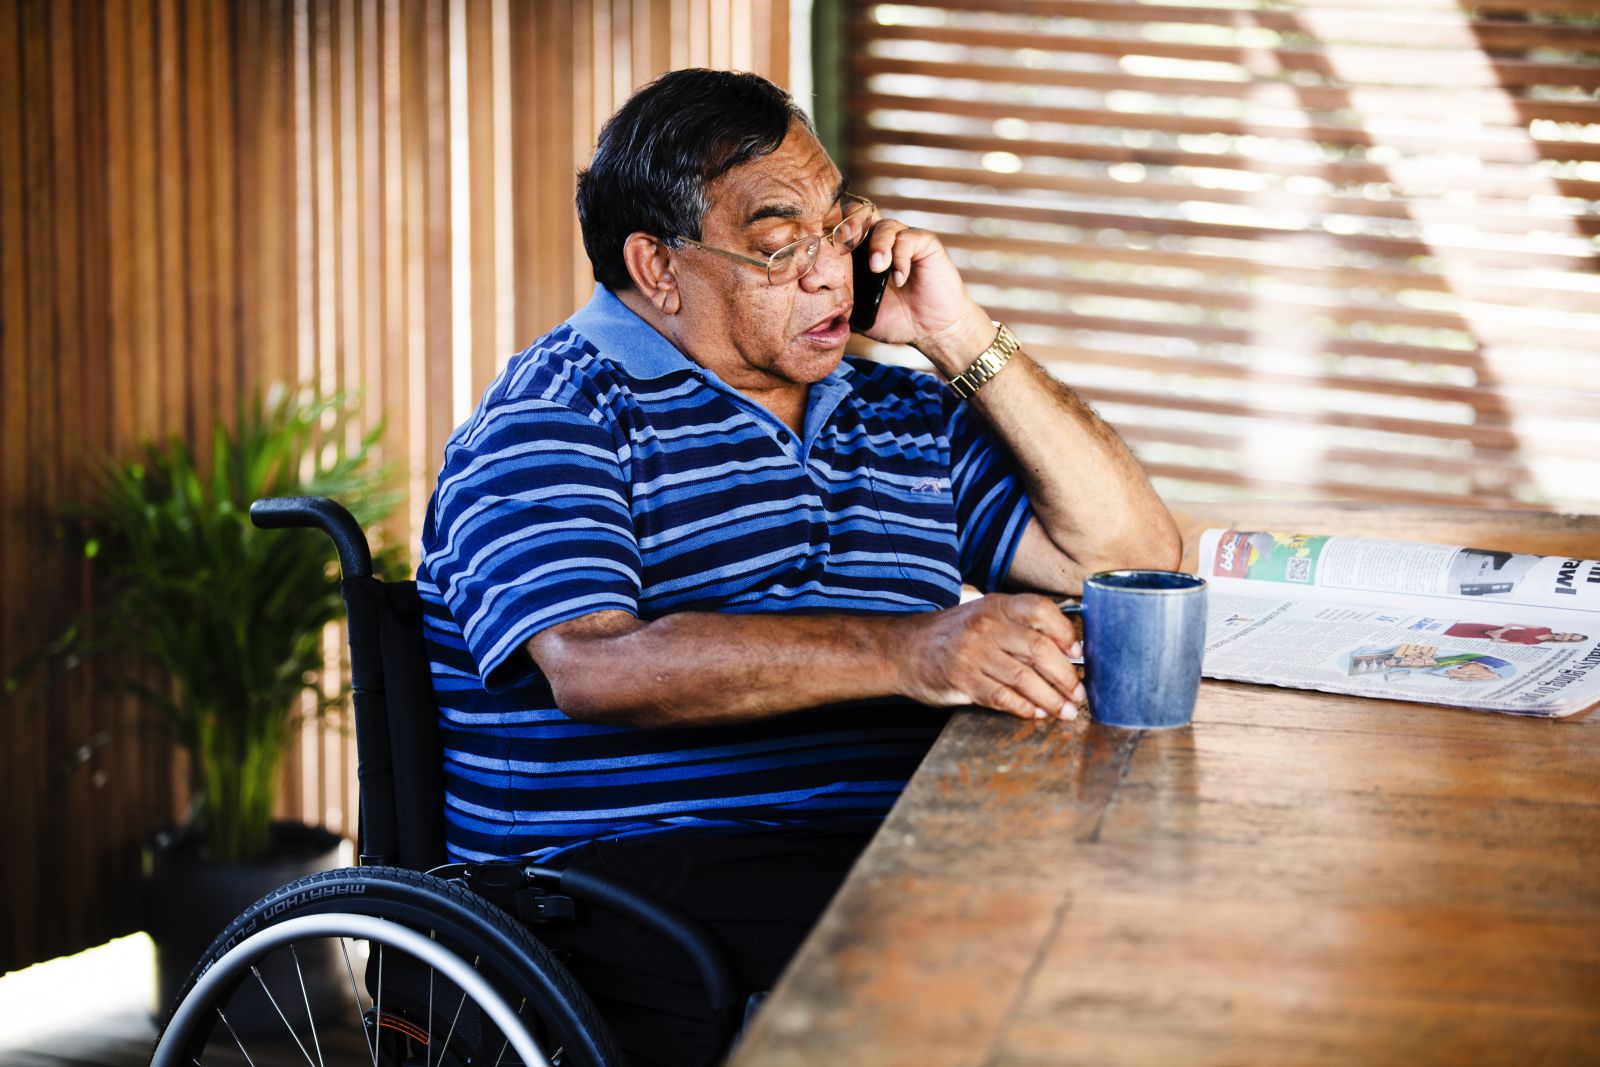 The image shows a man in a wheelchair next to a table. He is looking at a newspaper placed on the table. The man is also talking on the phone and is also holding a mug in his right hand. 